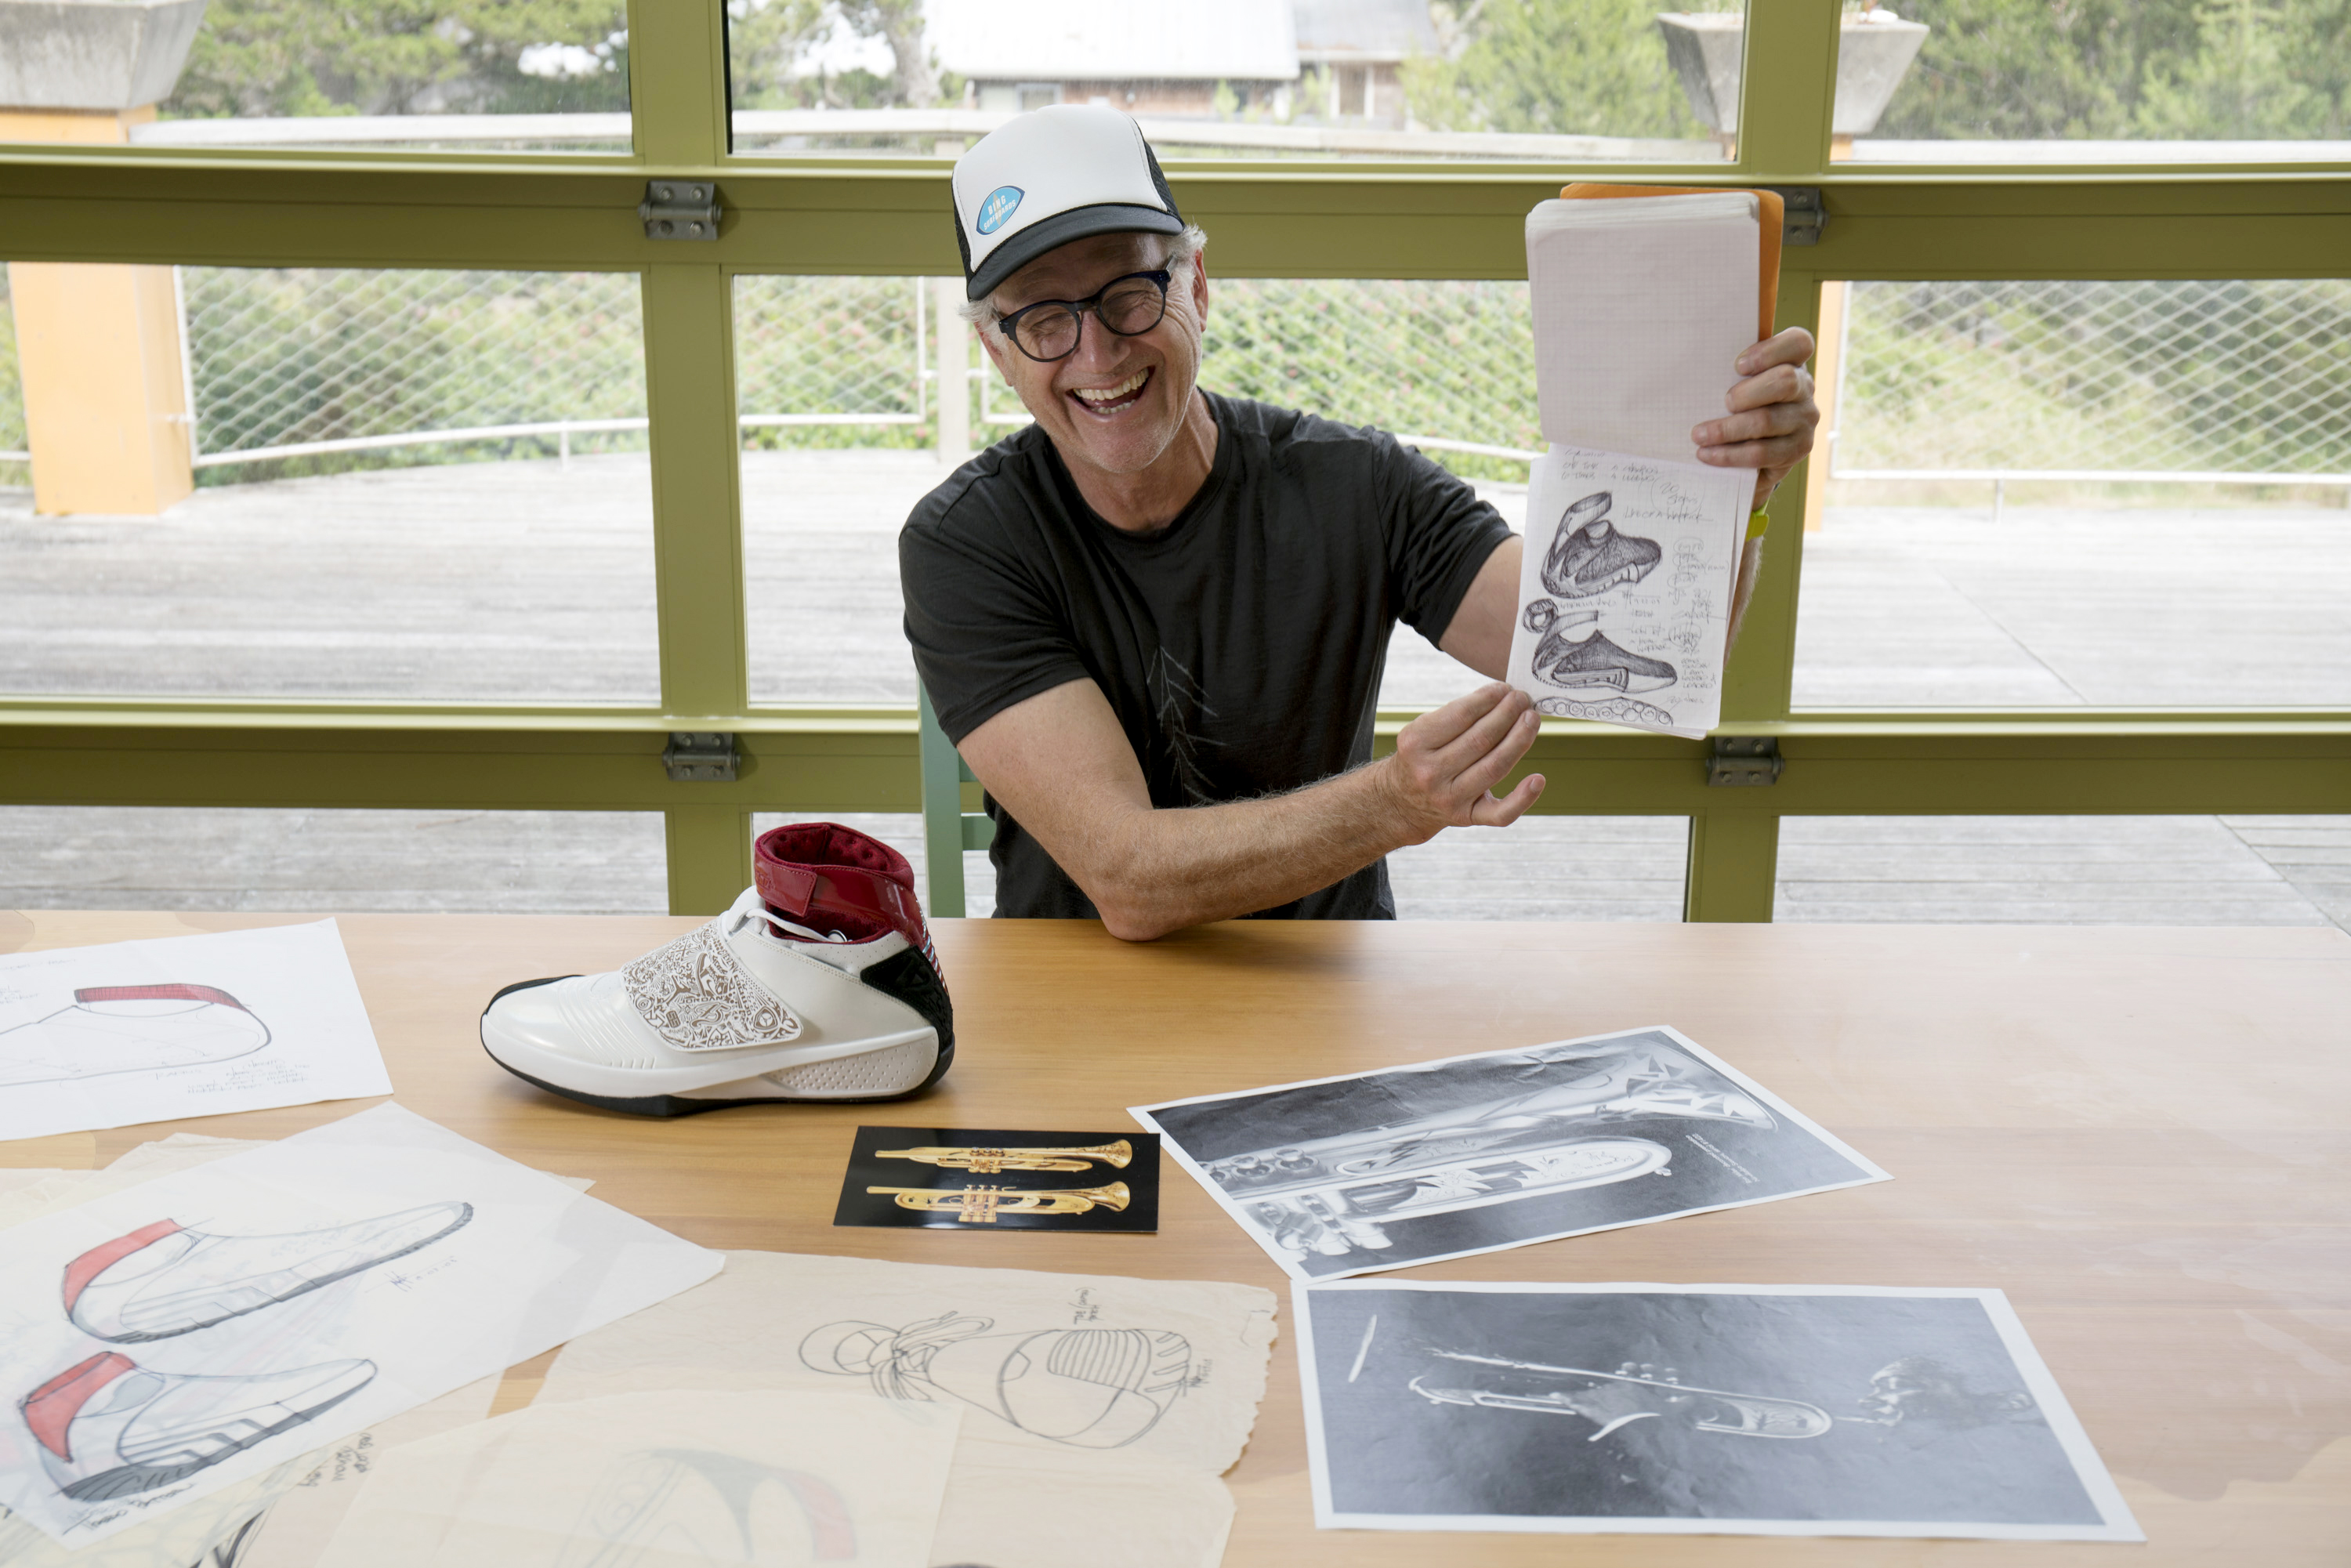 Abstract The Art of Design S01 – Ep02 Tinker Hatfield: Footwear Design